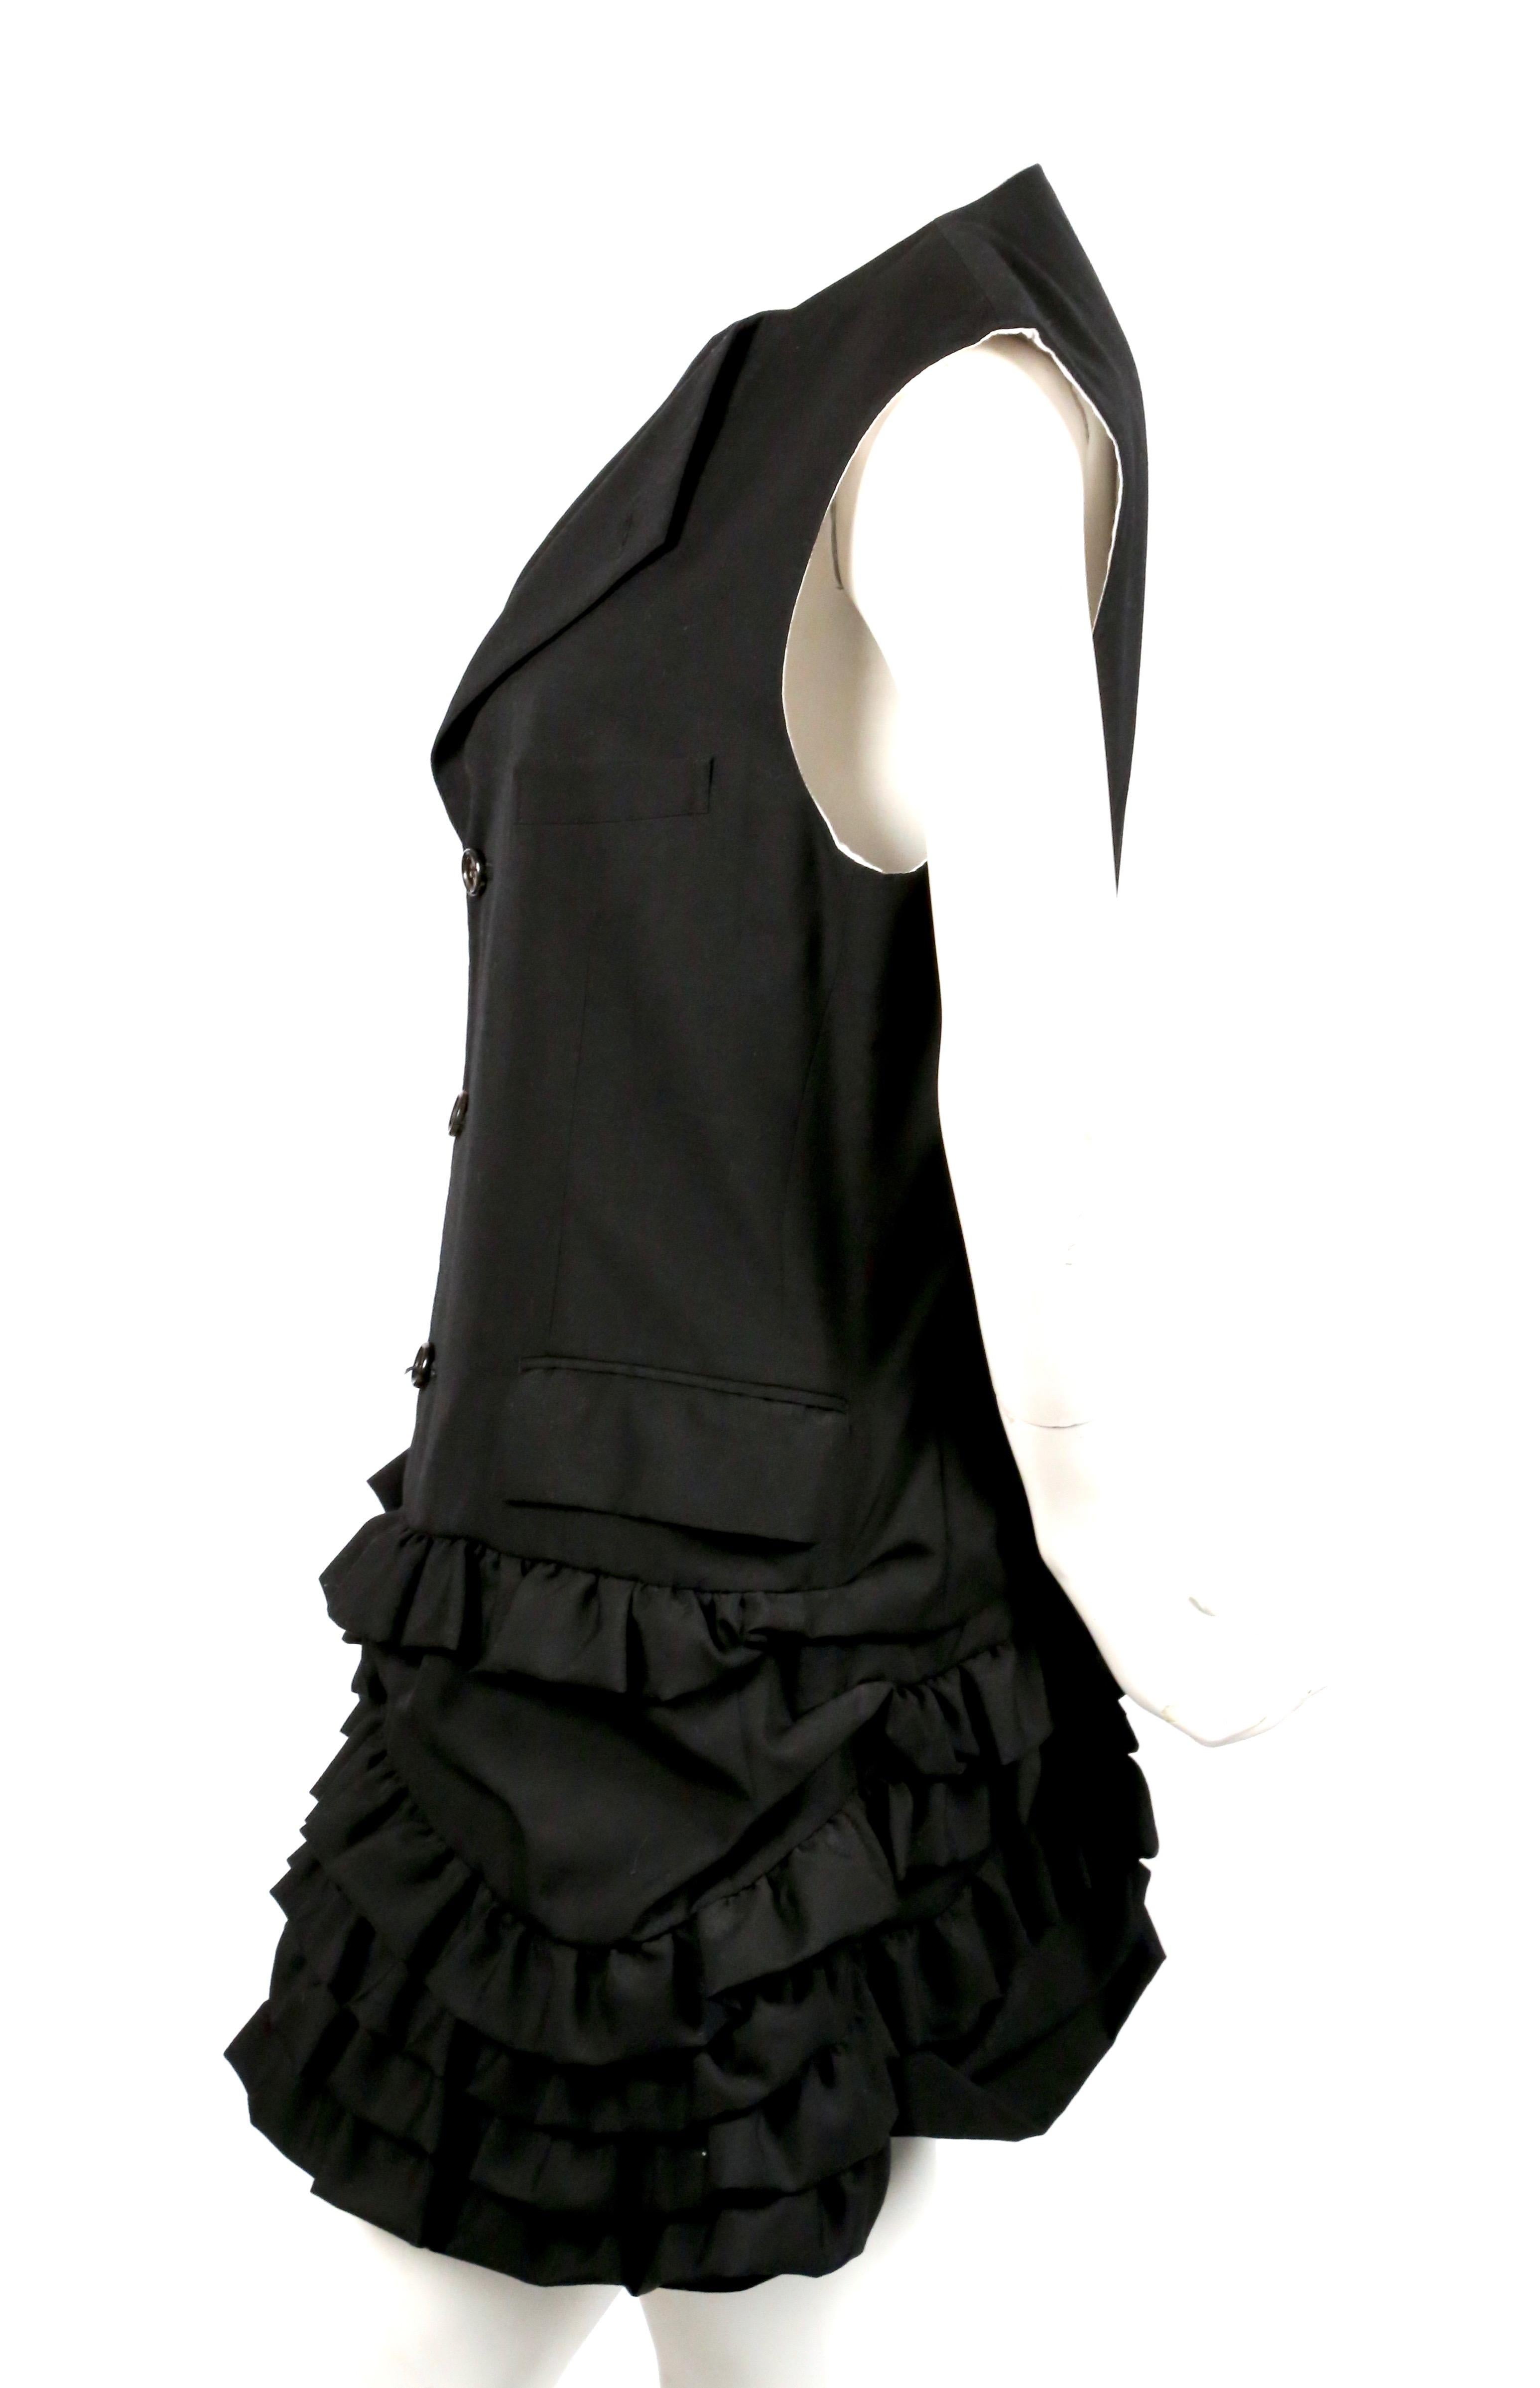 Jet-black, wool 'menswear' dress with ruffled skirting from Comme Des Garcons dating to 1994. Size 'S'. Approximate measurements: shoulder 15